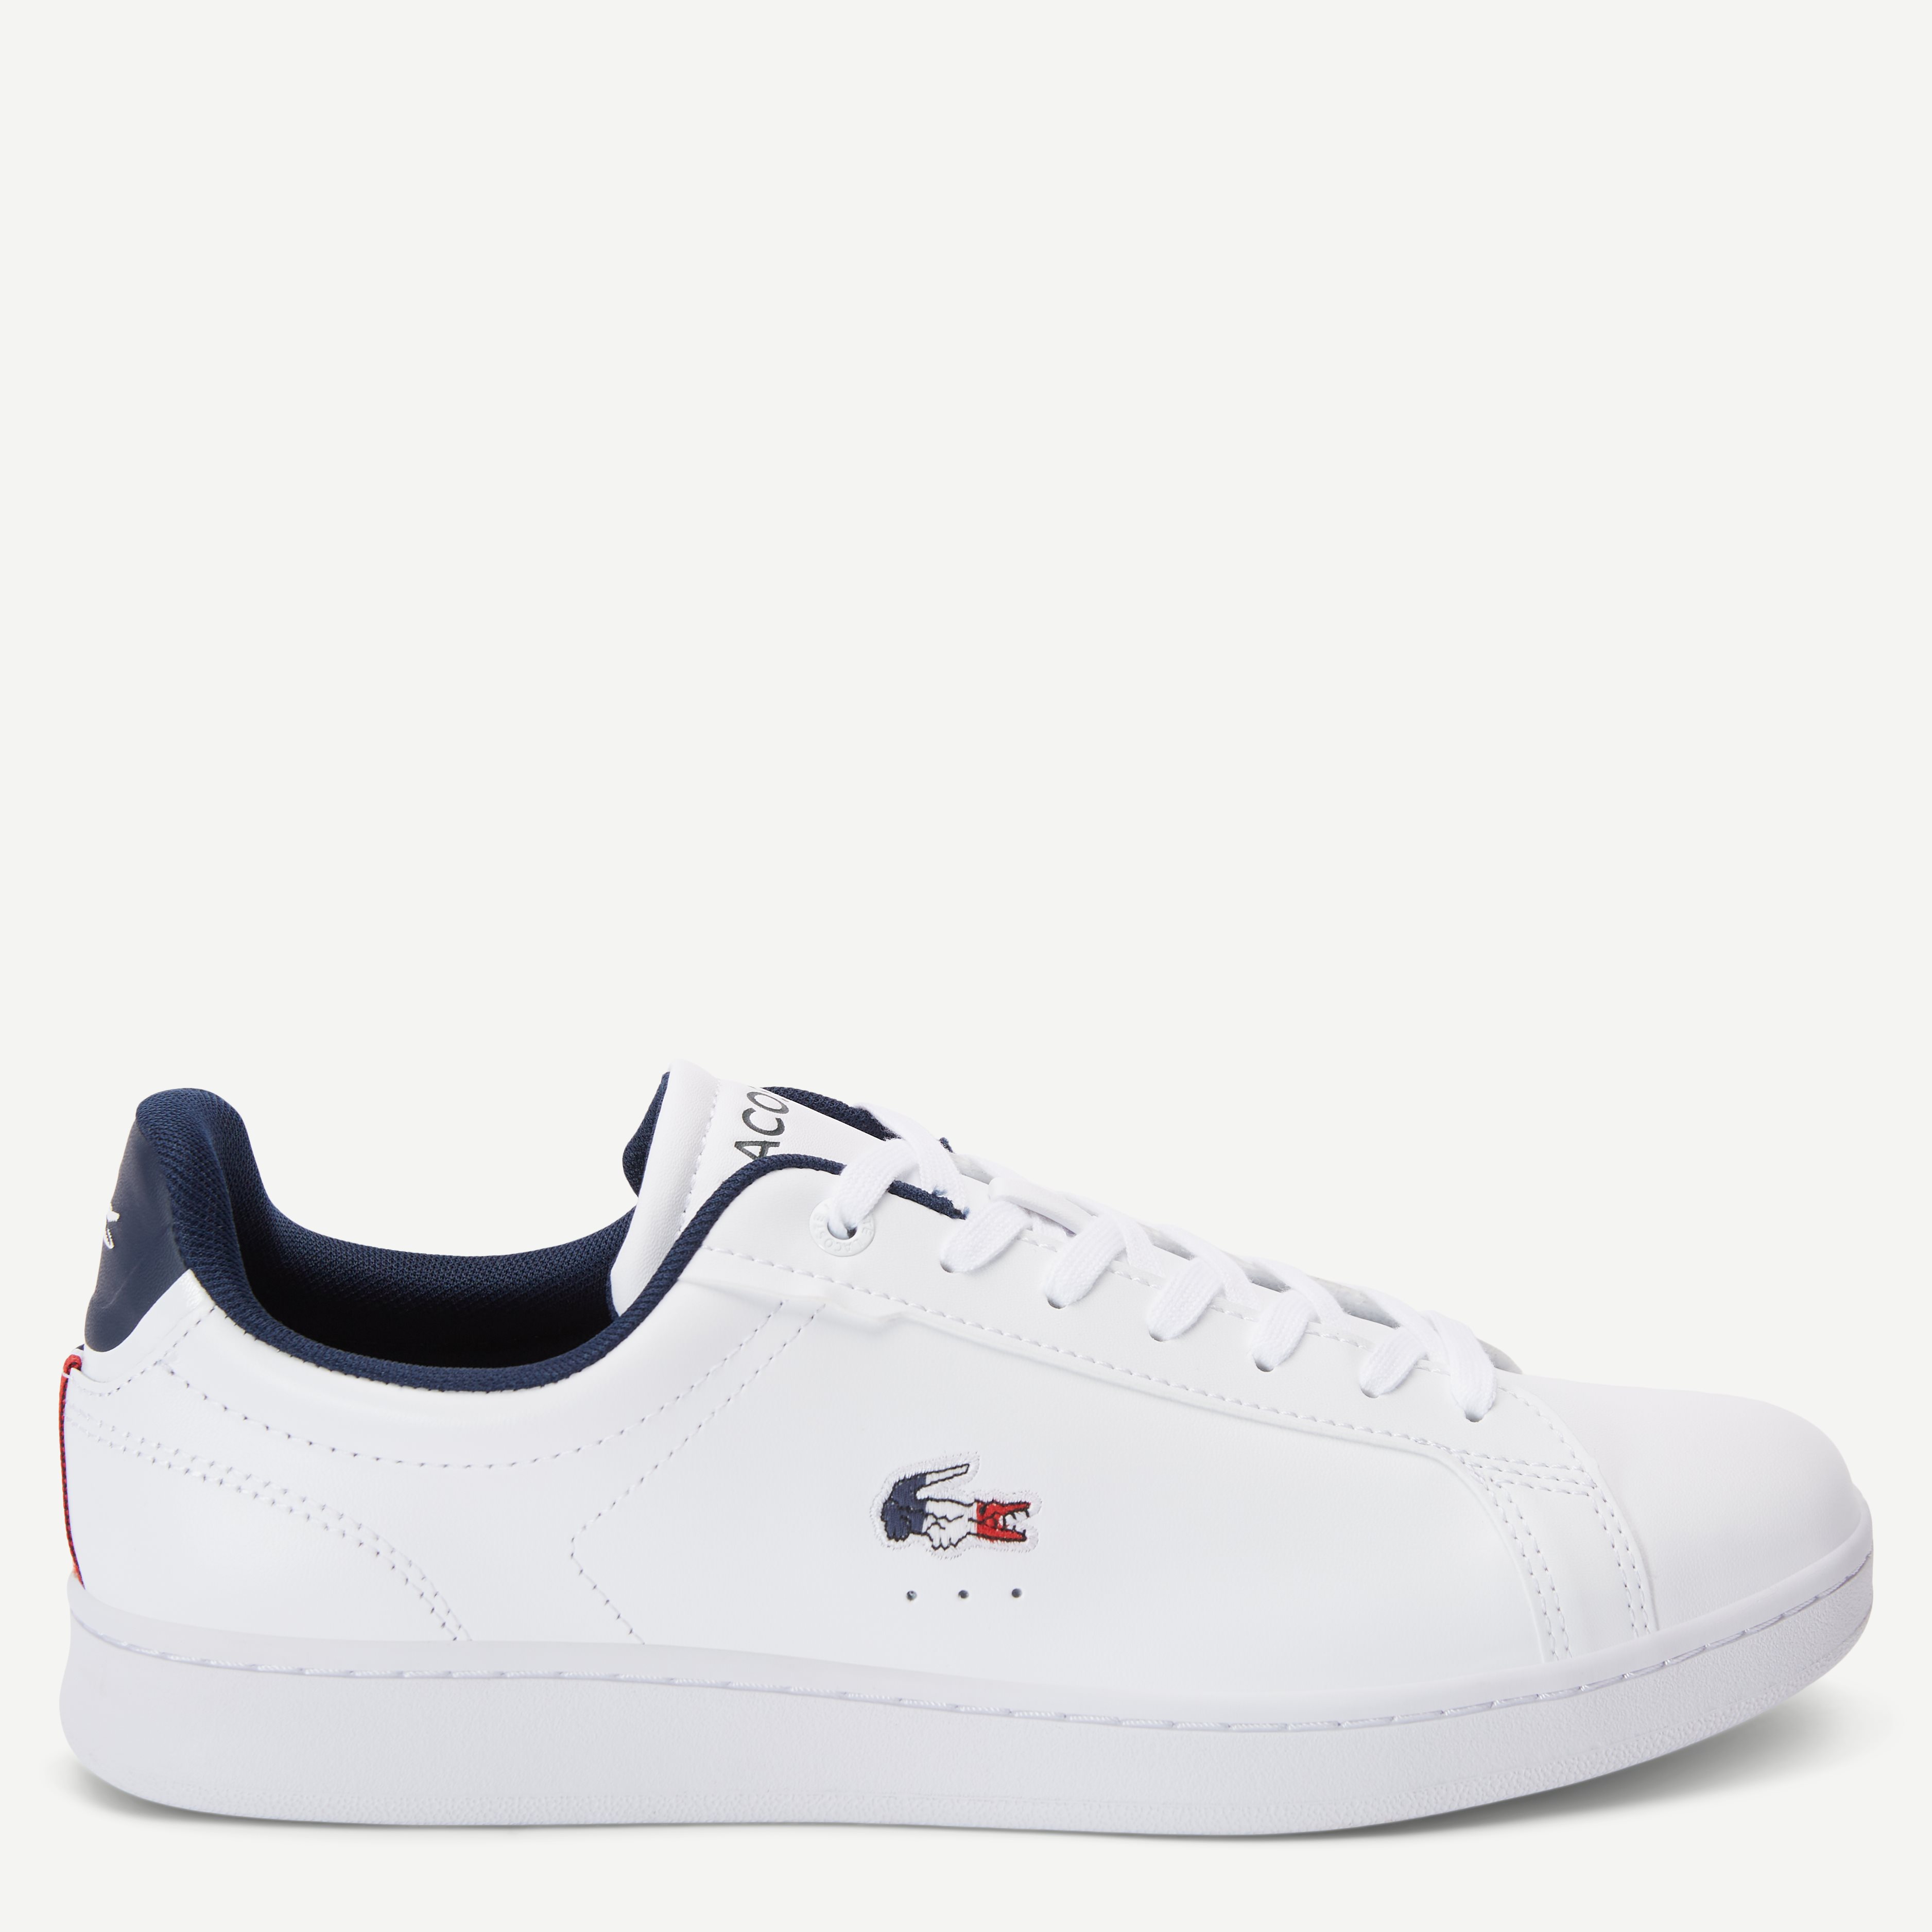 Lacoste Shoes CARNABY 45SMA0114 White